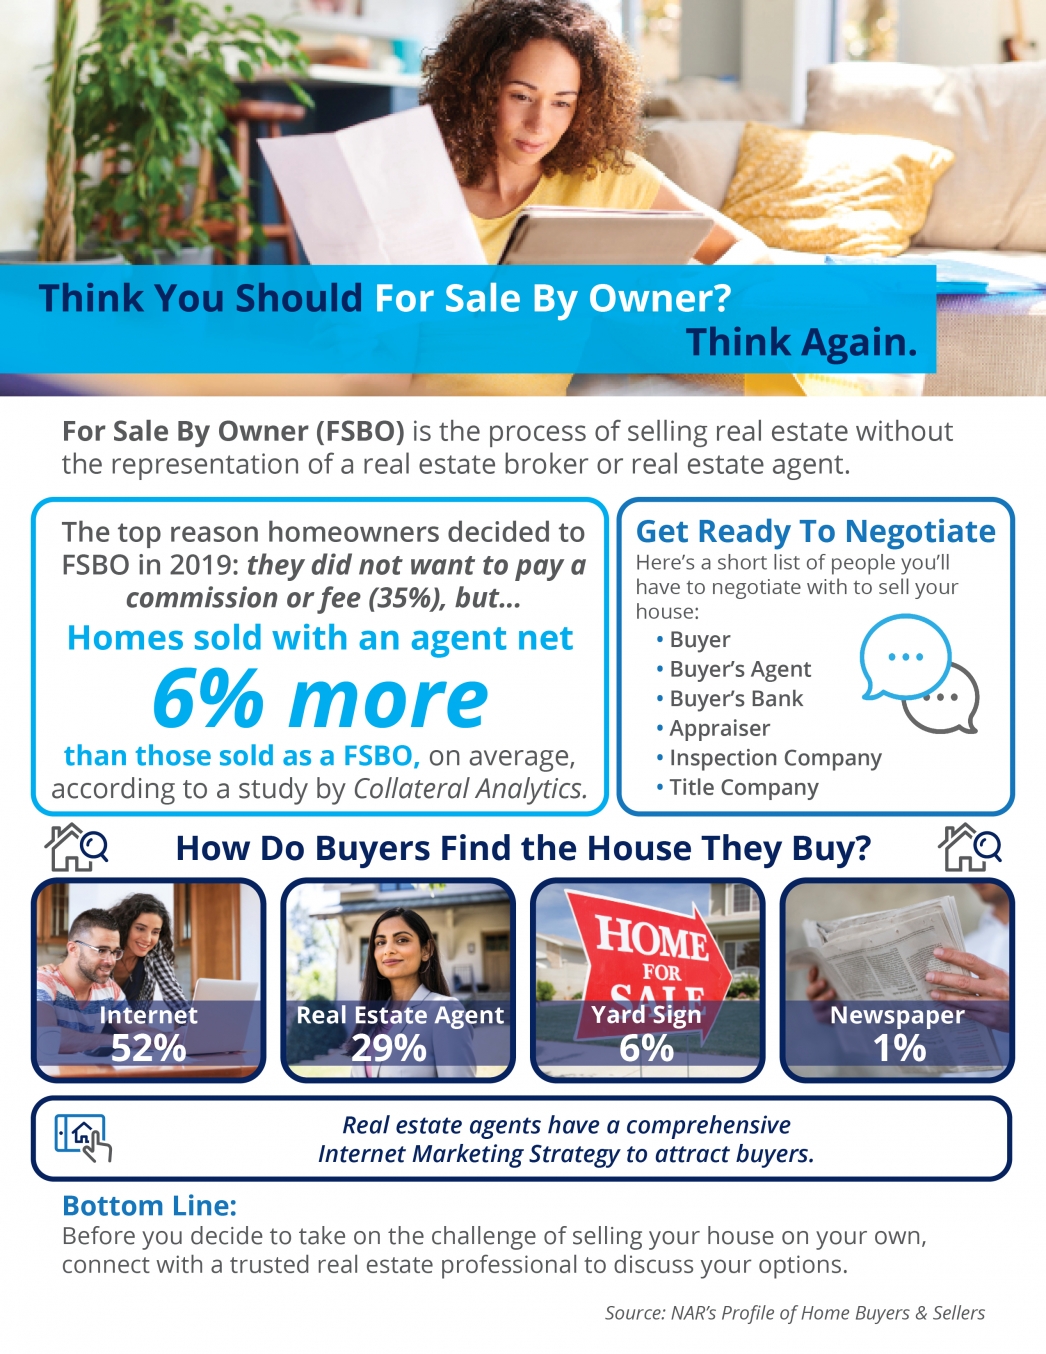 Think You Should For Sale By Owner? Think Again [INFOGRAPHIC] | MyKCM